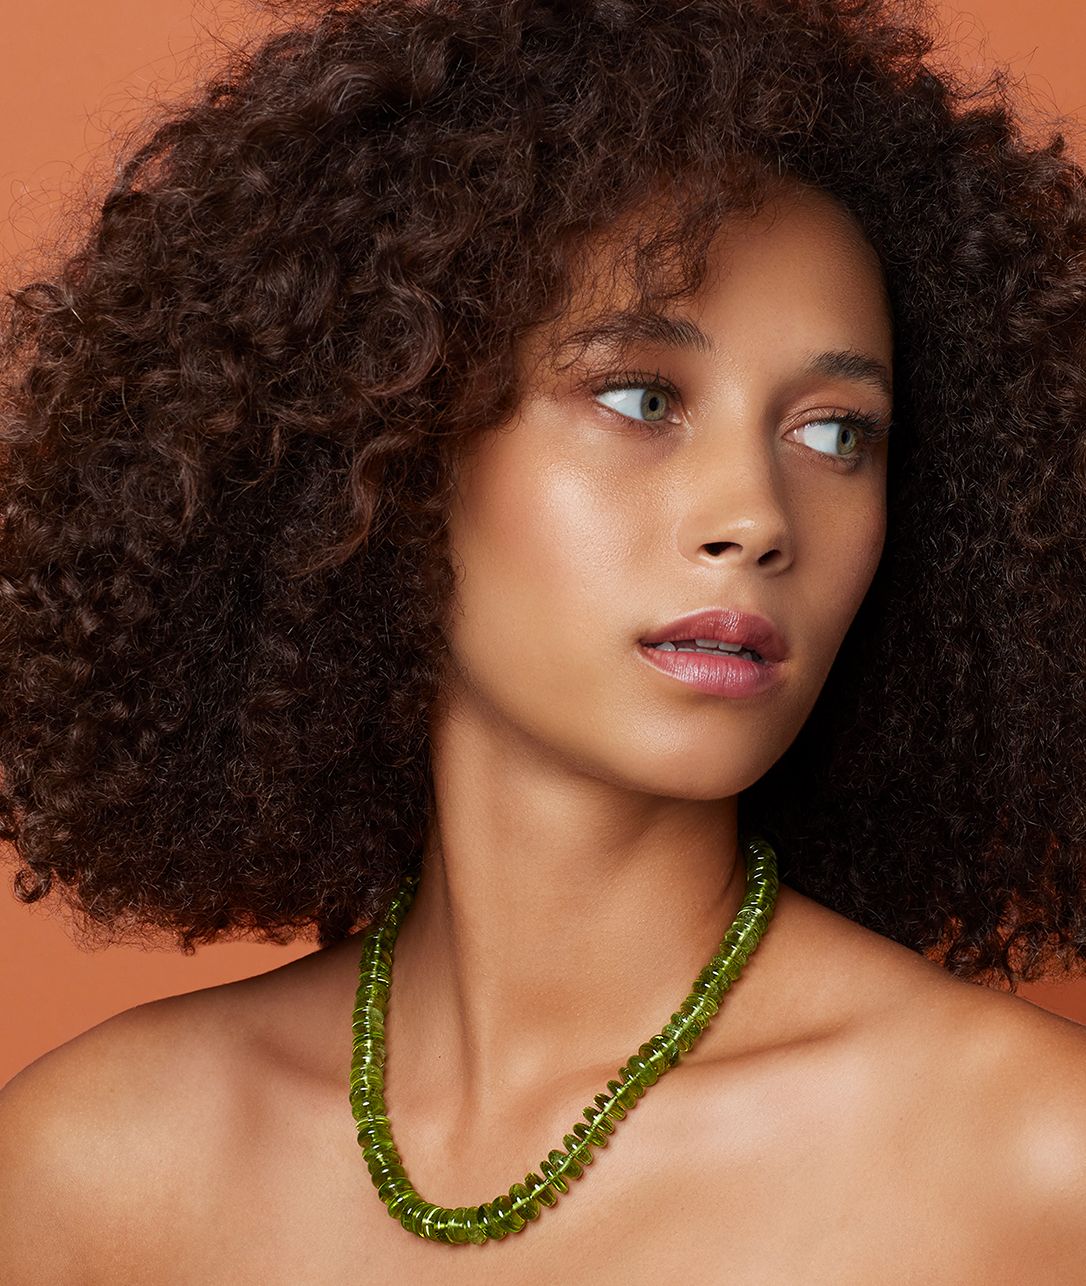 Peridot at its bright and lively best. Known as August's birthstone, it's thought to evoke compassion and creativity.SHOP PERIDOT